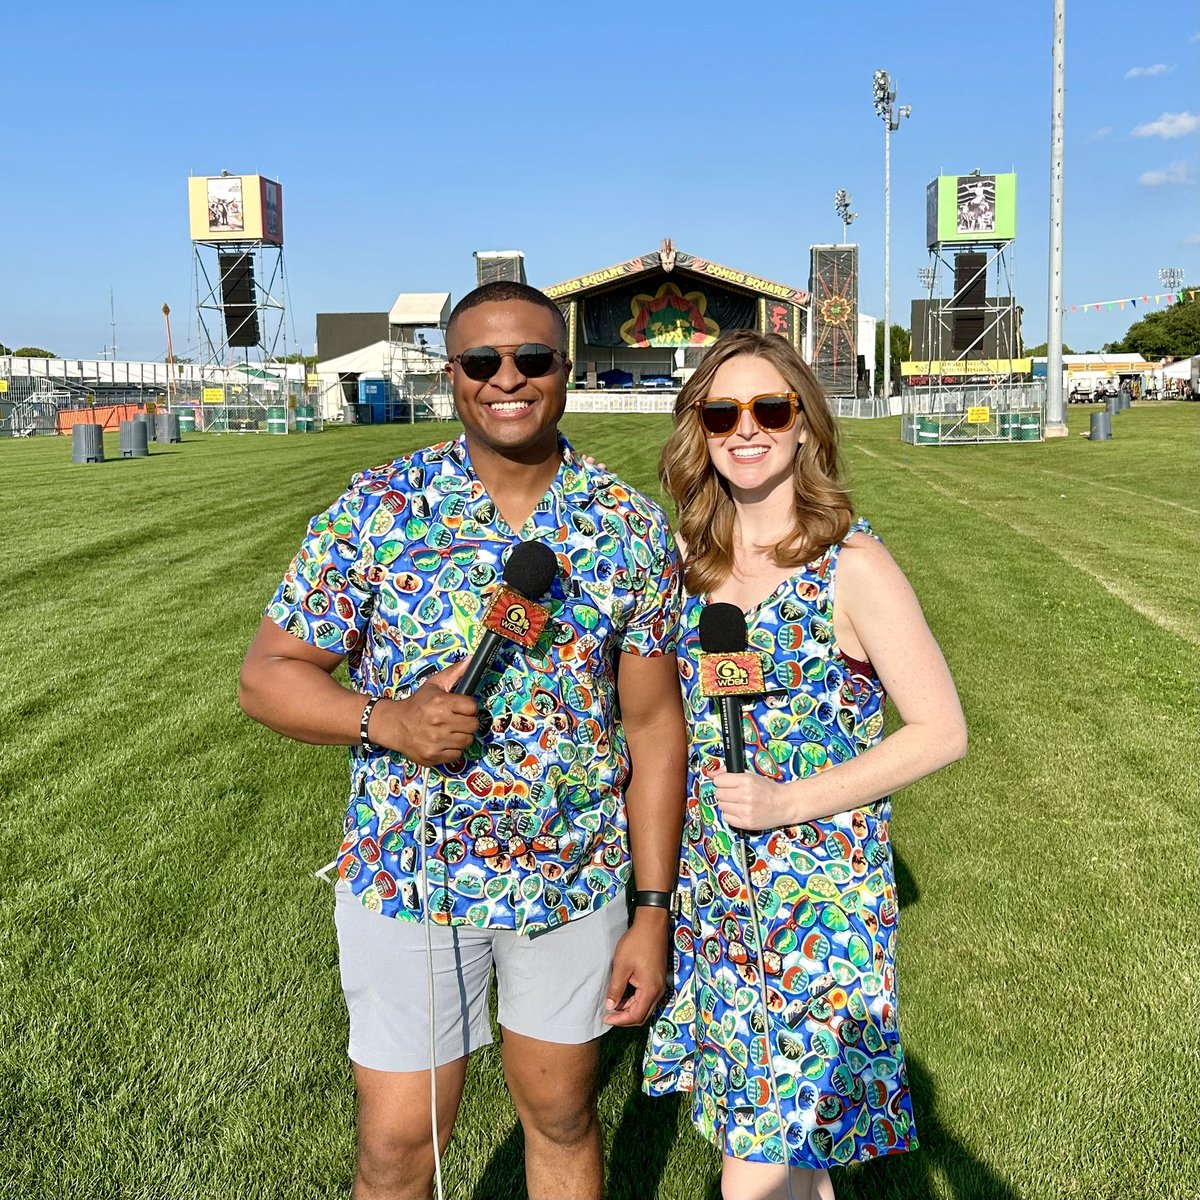 FEST YOUR BEST 🎶 @Darryl_Forges and I will be live on @wdsu at 6:30 with everything you need to know about @jazzfest! Join us 👋🏻